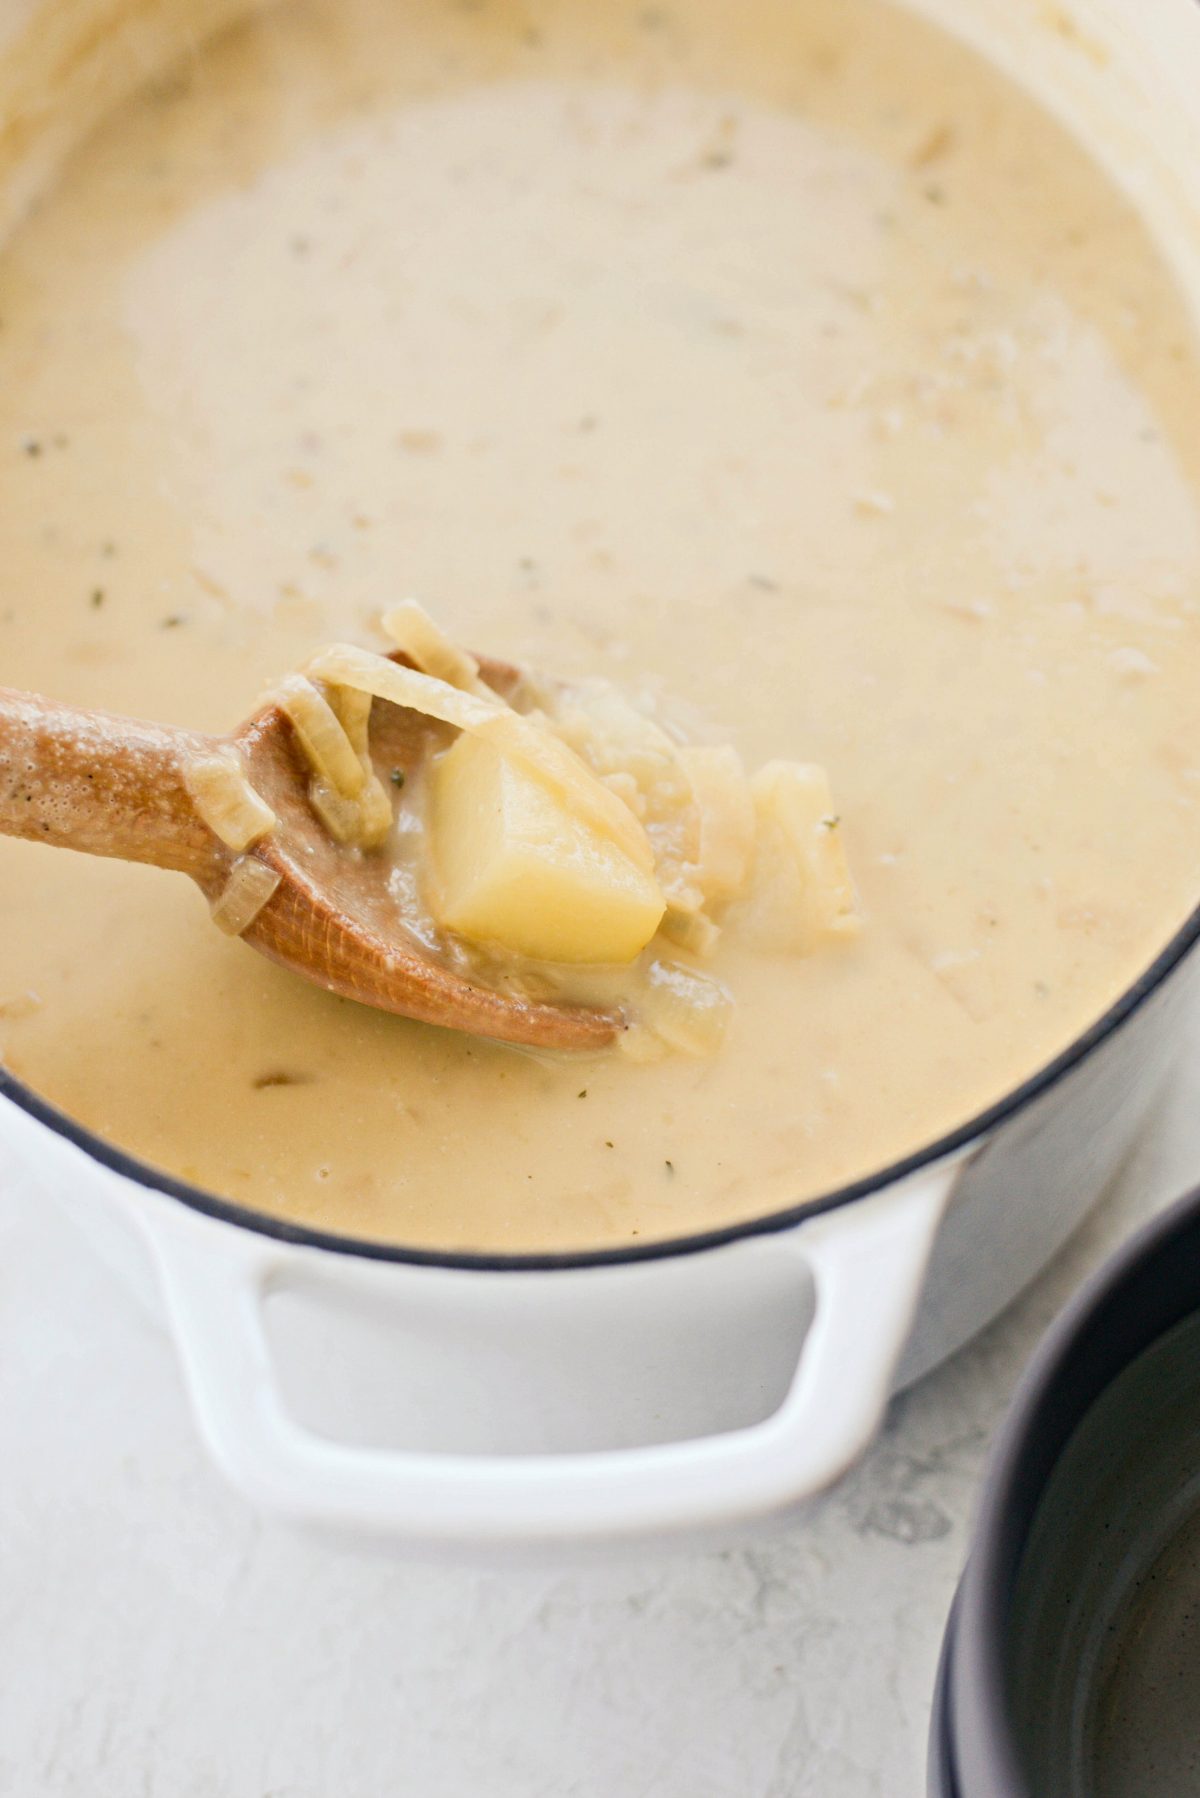 French Onion Chowder l SimplyScratch.com #frenchonion #chowder #soup #homemade #fromscratch #potatoes #onions